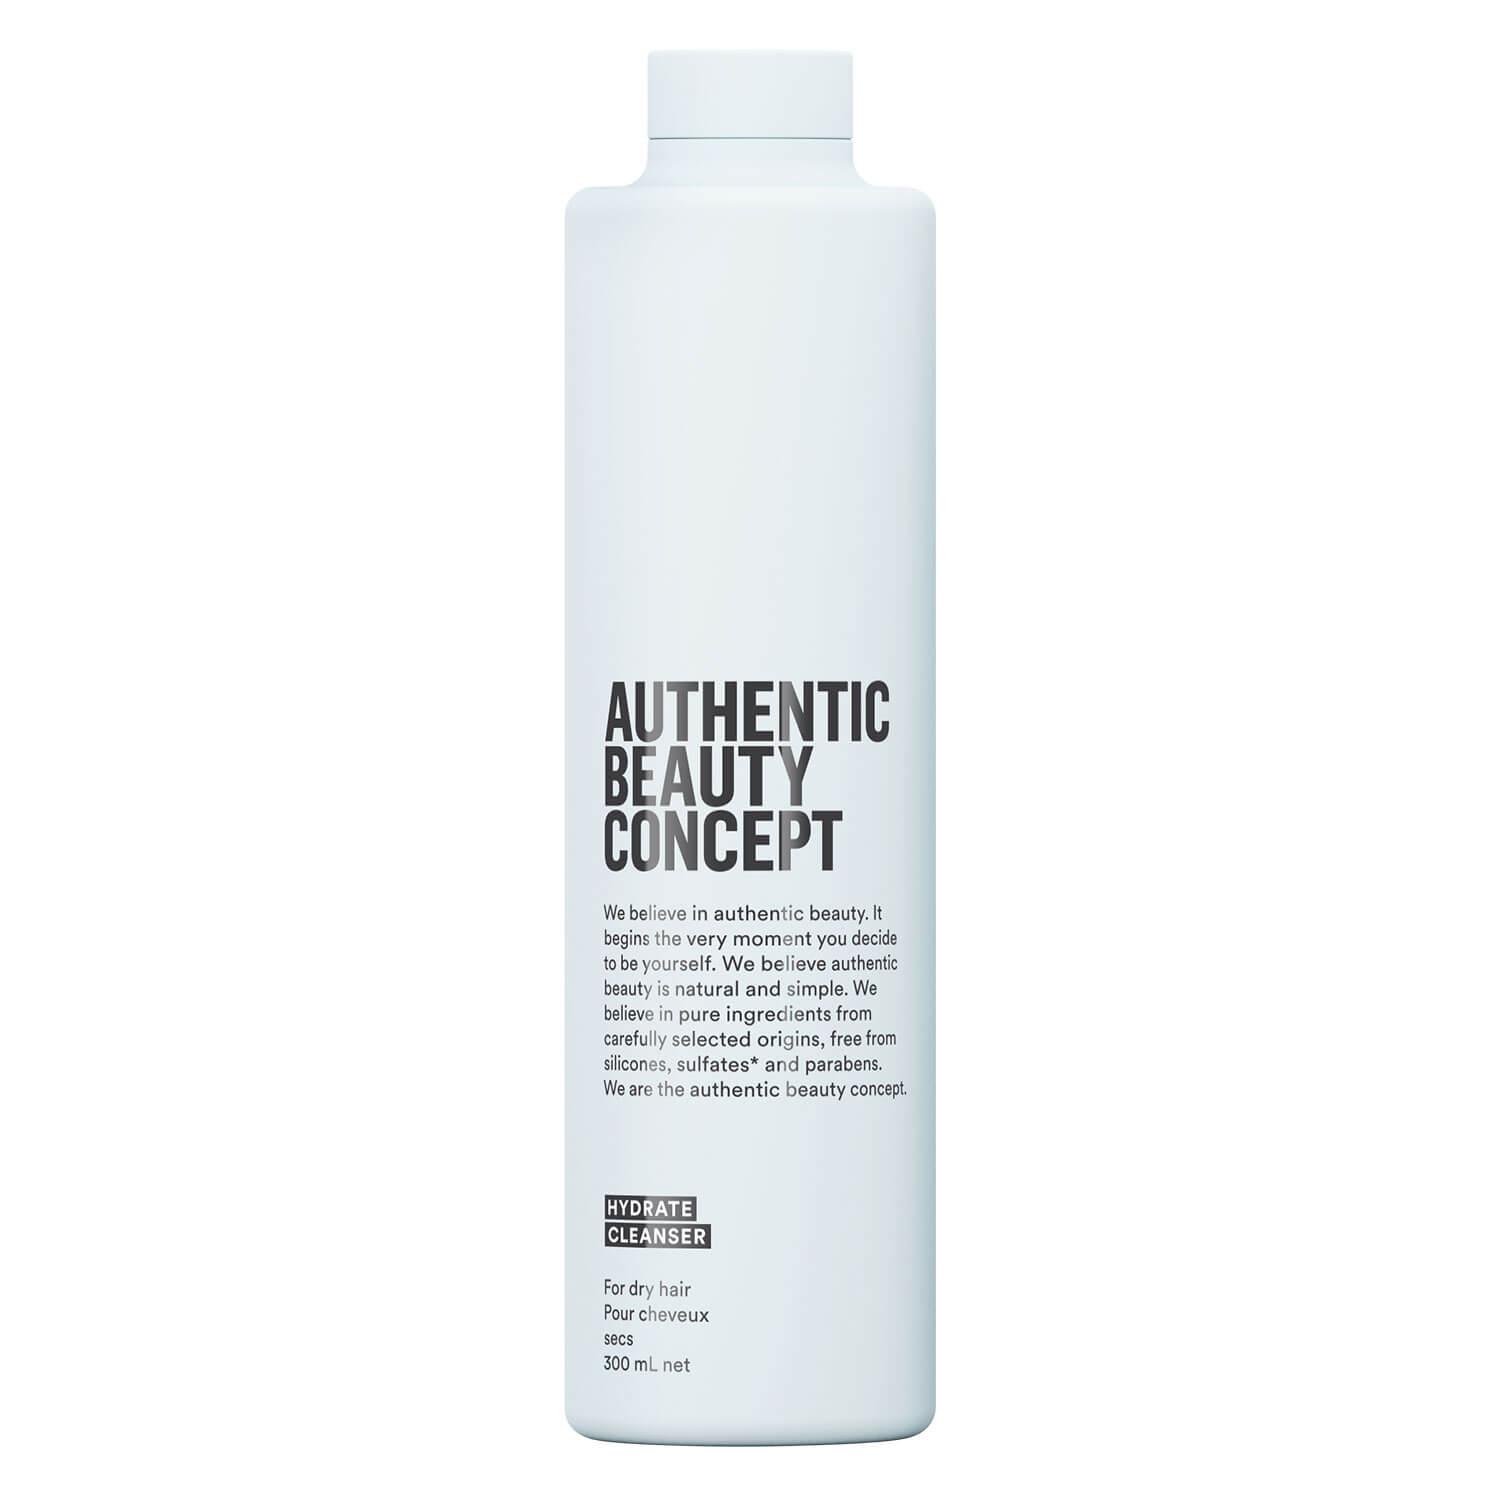 Authentic Beauty Concept - Hydrate Cleanser